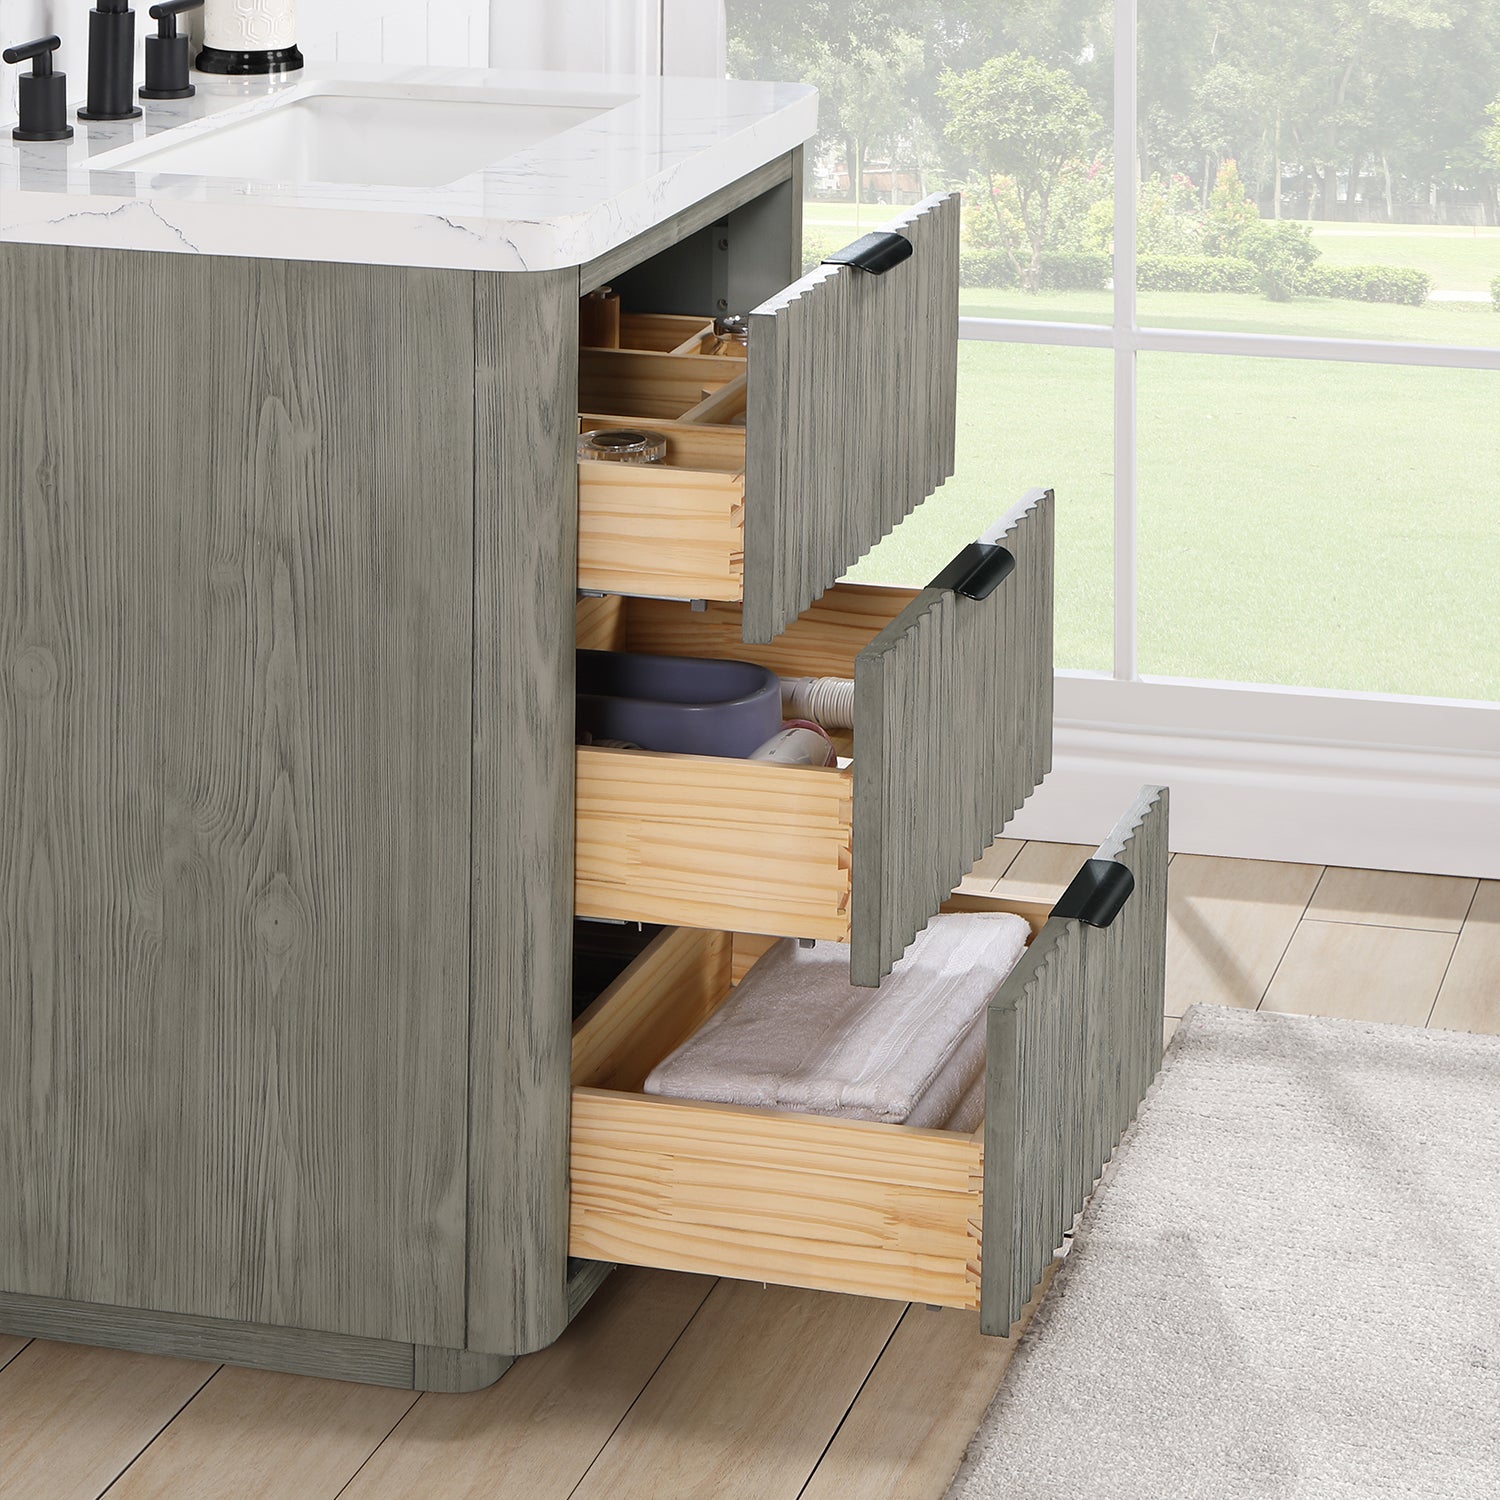 Cádiz 24in. Free-standing Single Bathroom Vanity in Fir Wood Grey with Composite top in Lightning White